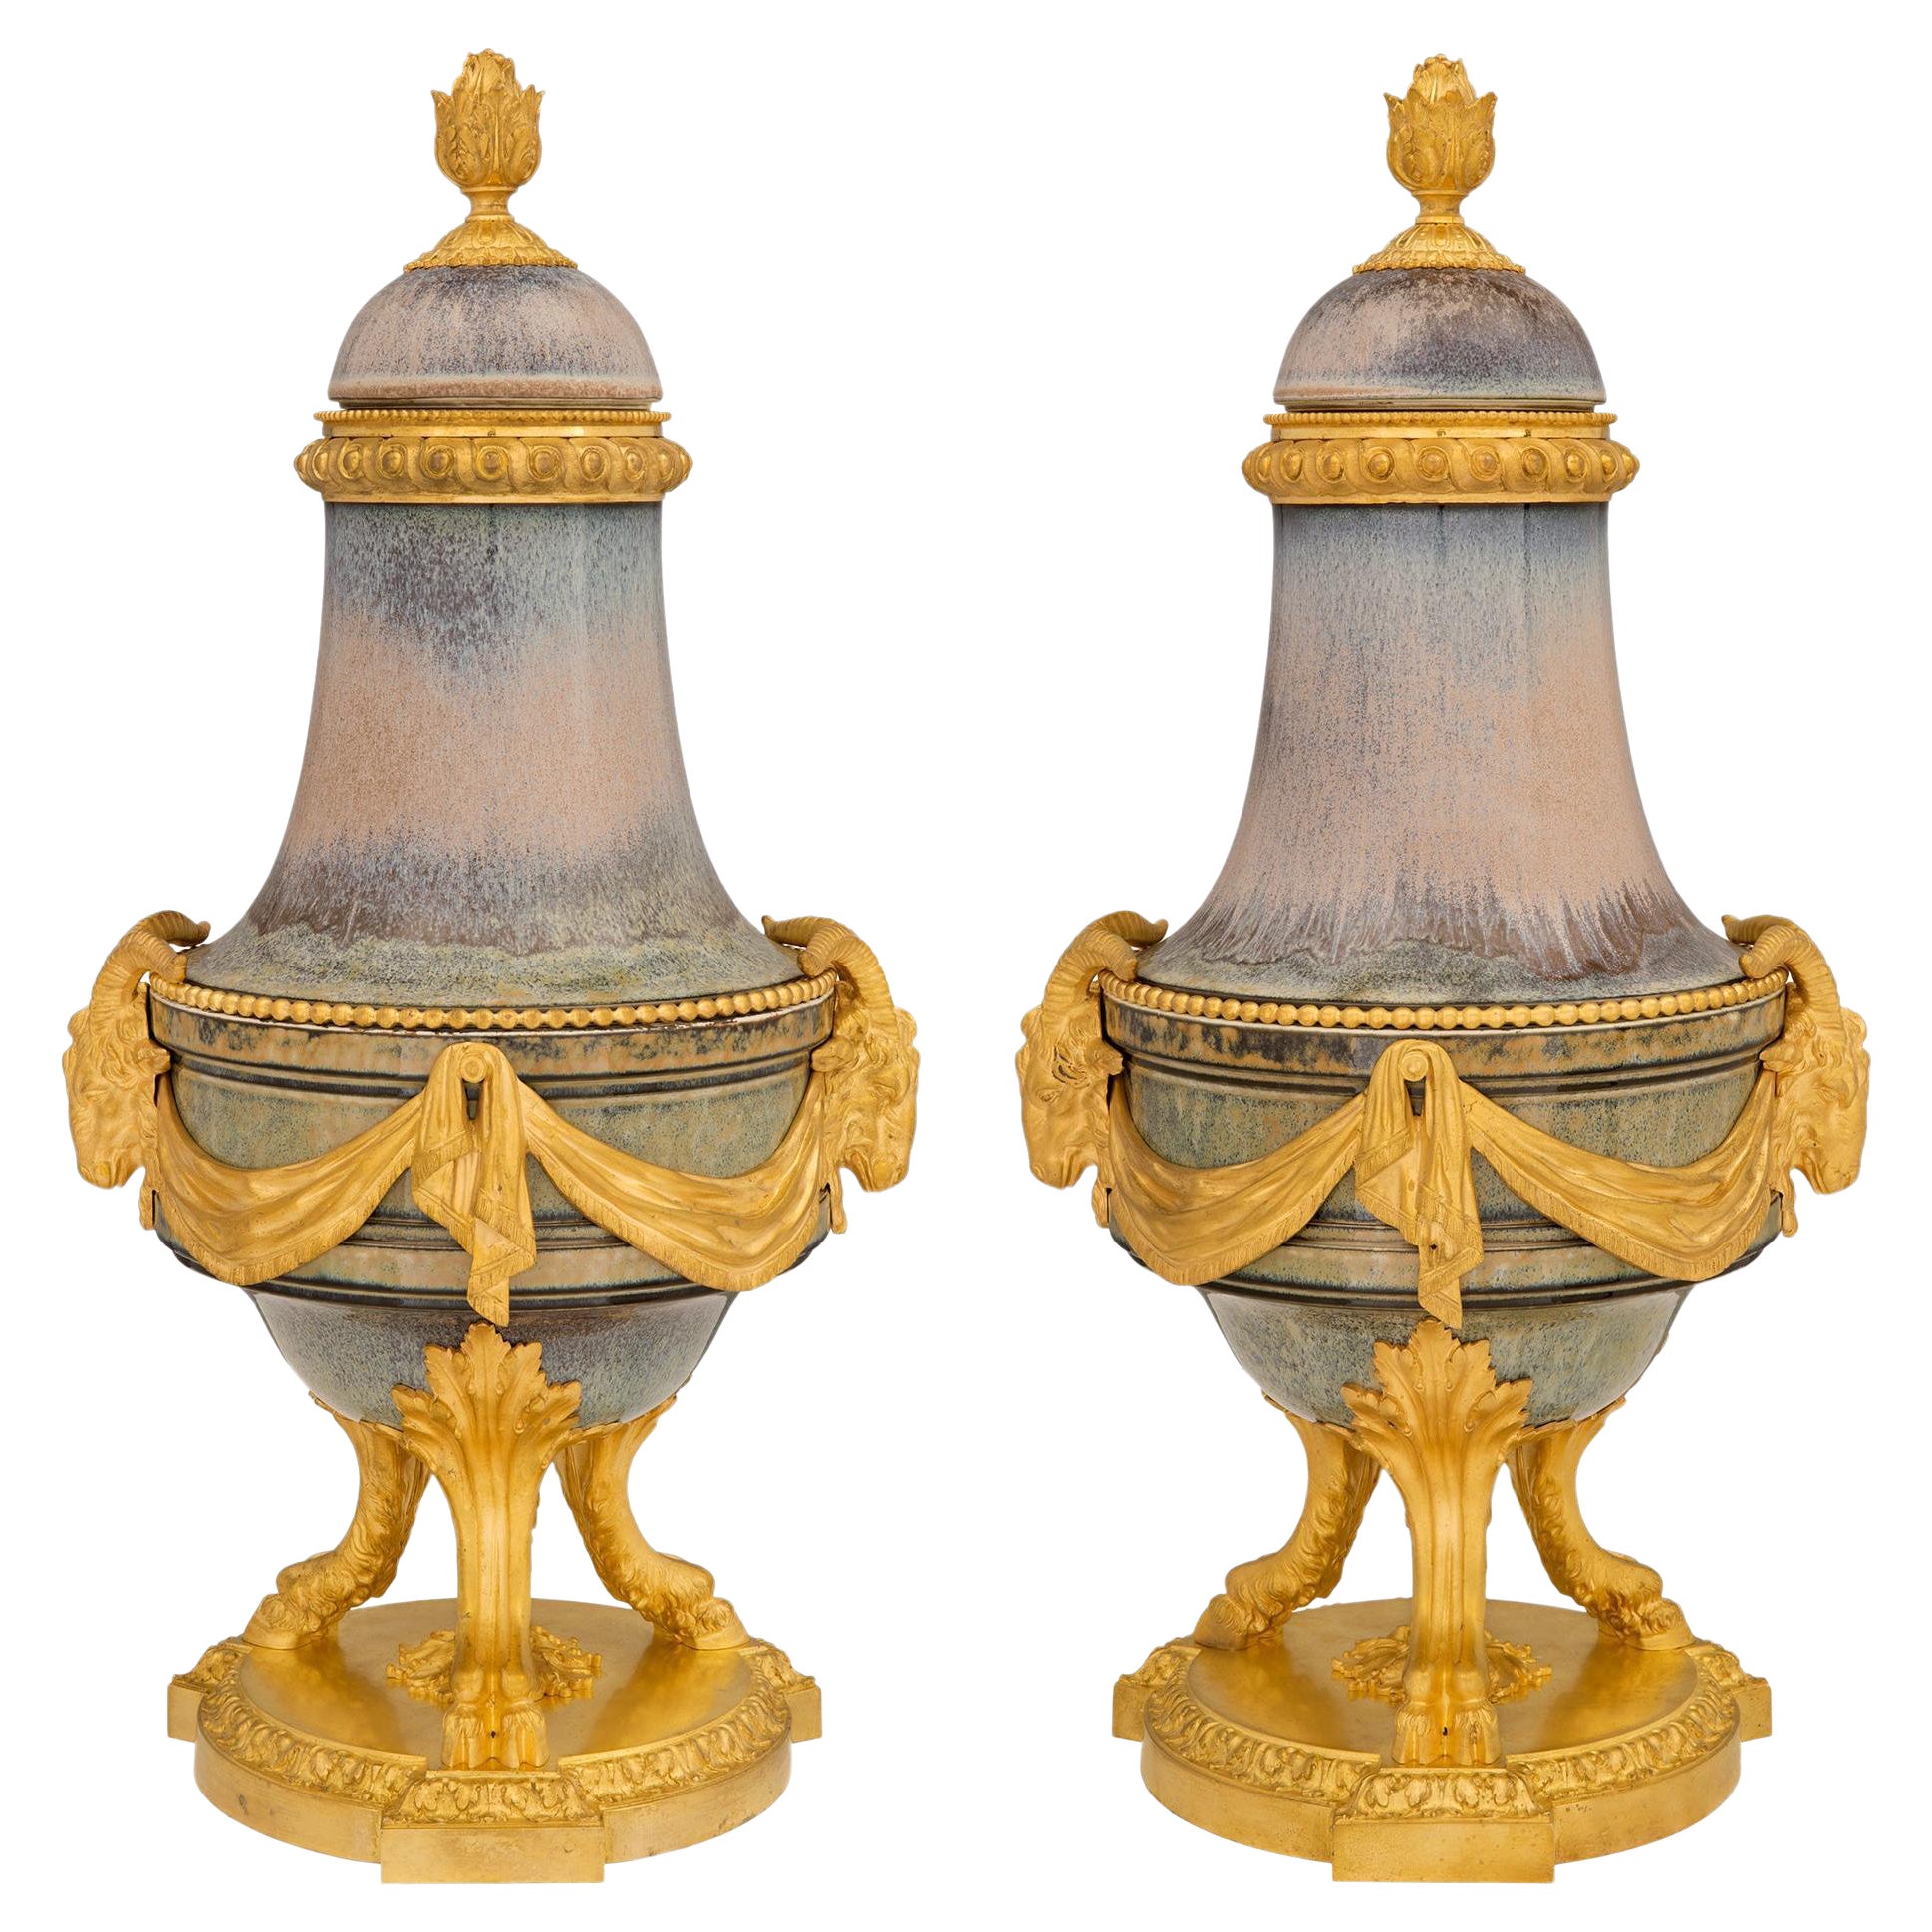 Pair of French 19th Century Louis XVI St. Porcelain and Ormolu Lidded Urns For Sale